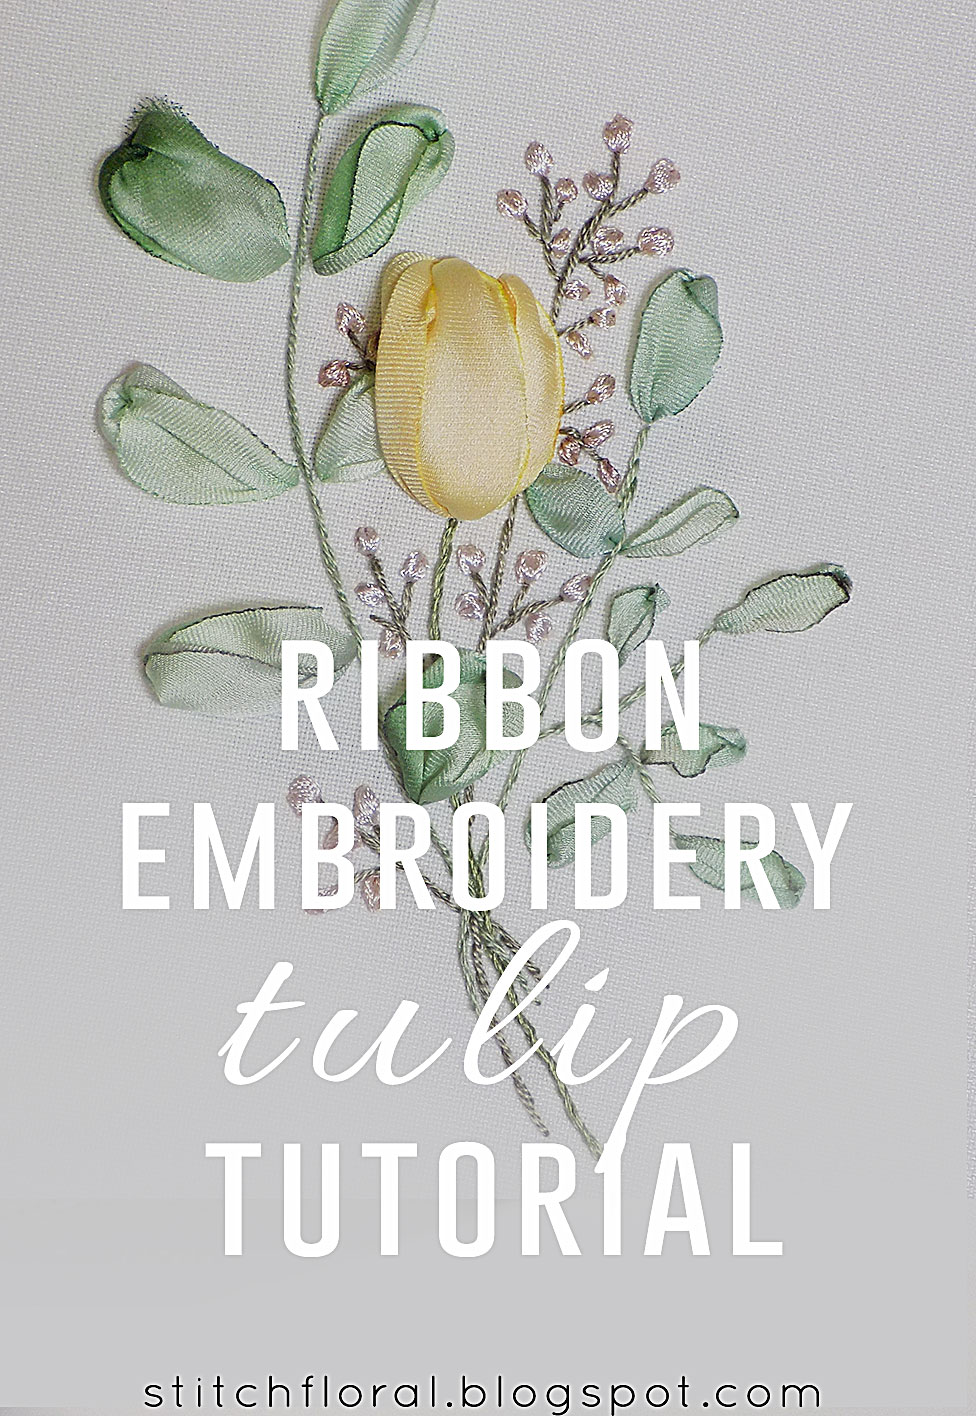 Ribbon Embroidery Books and Tutorials